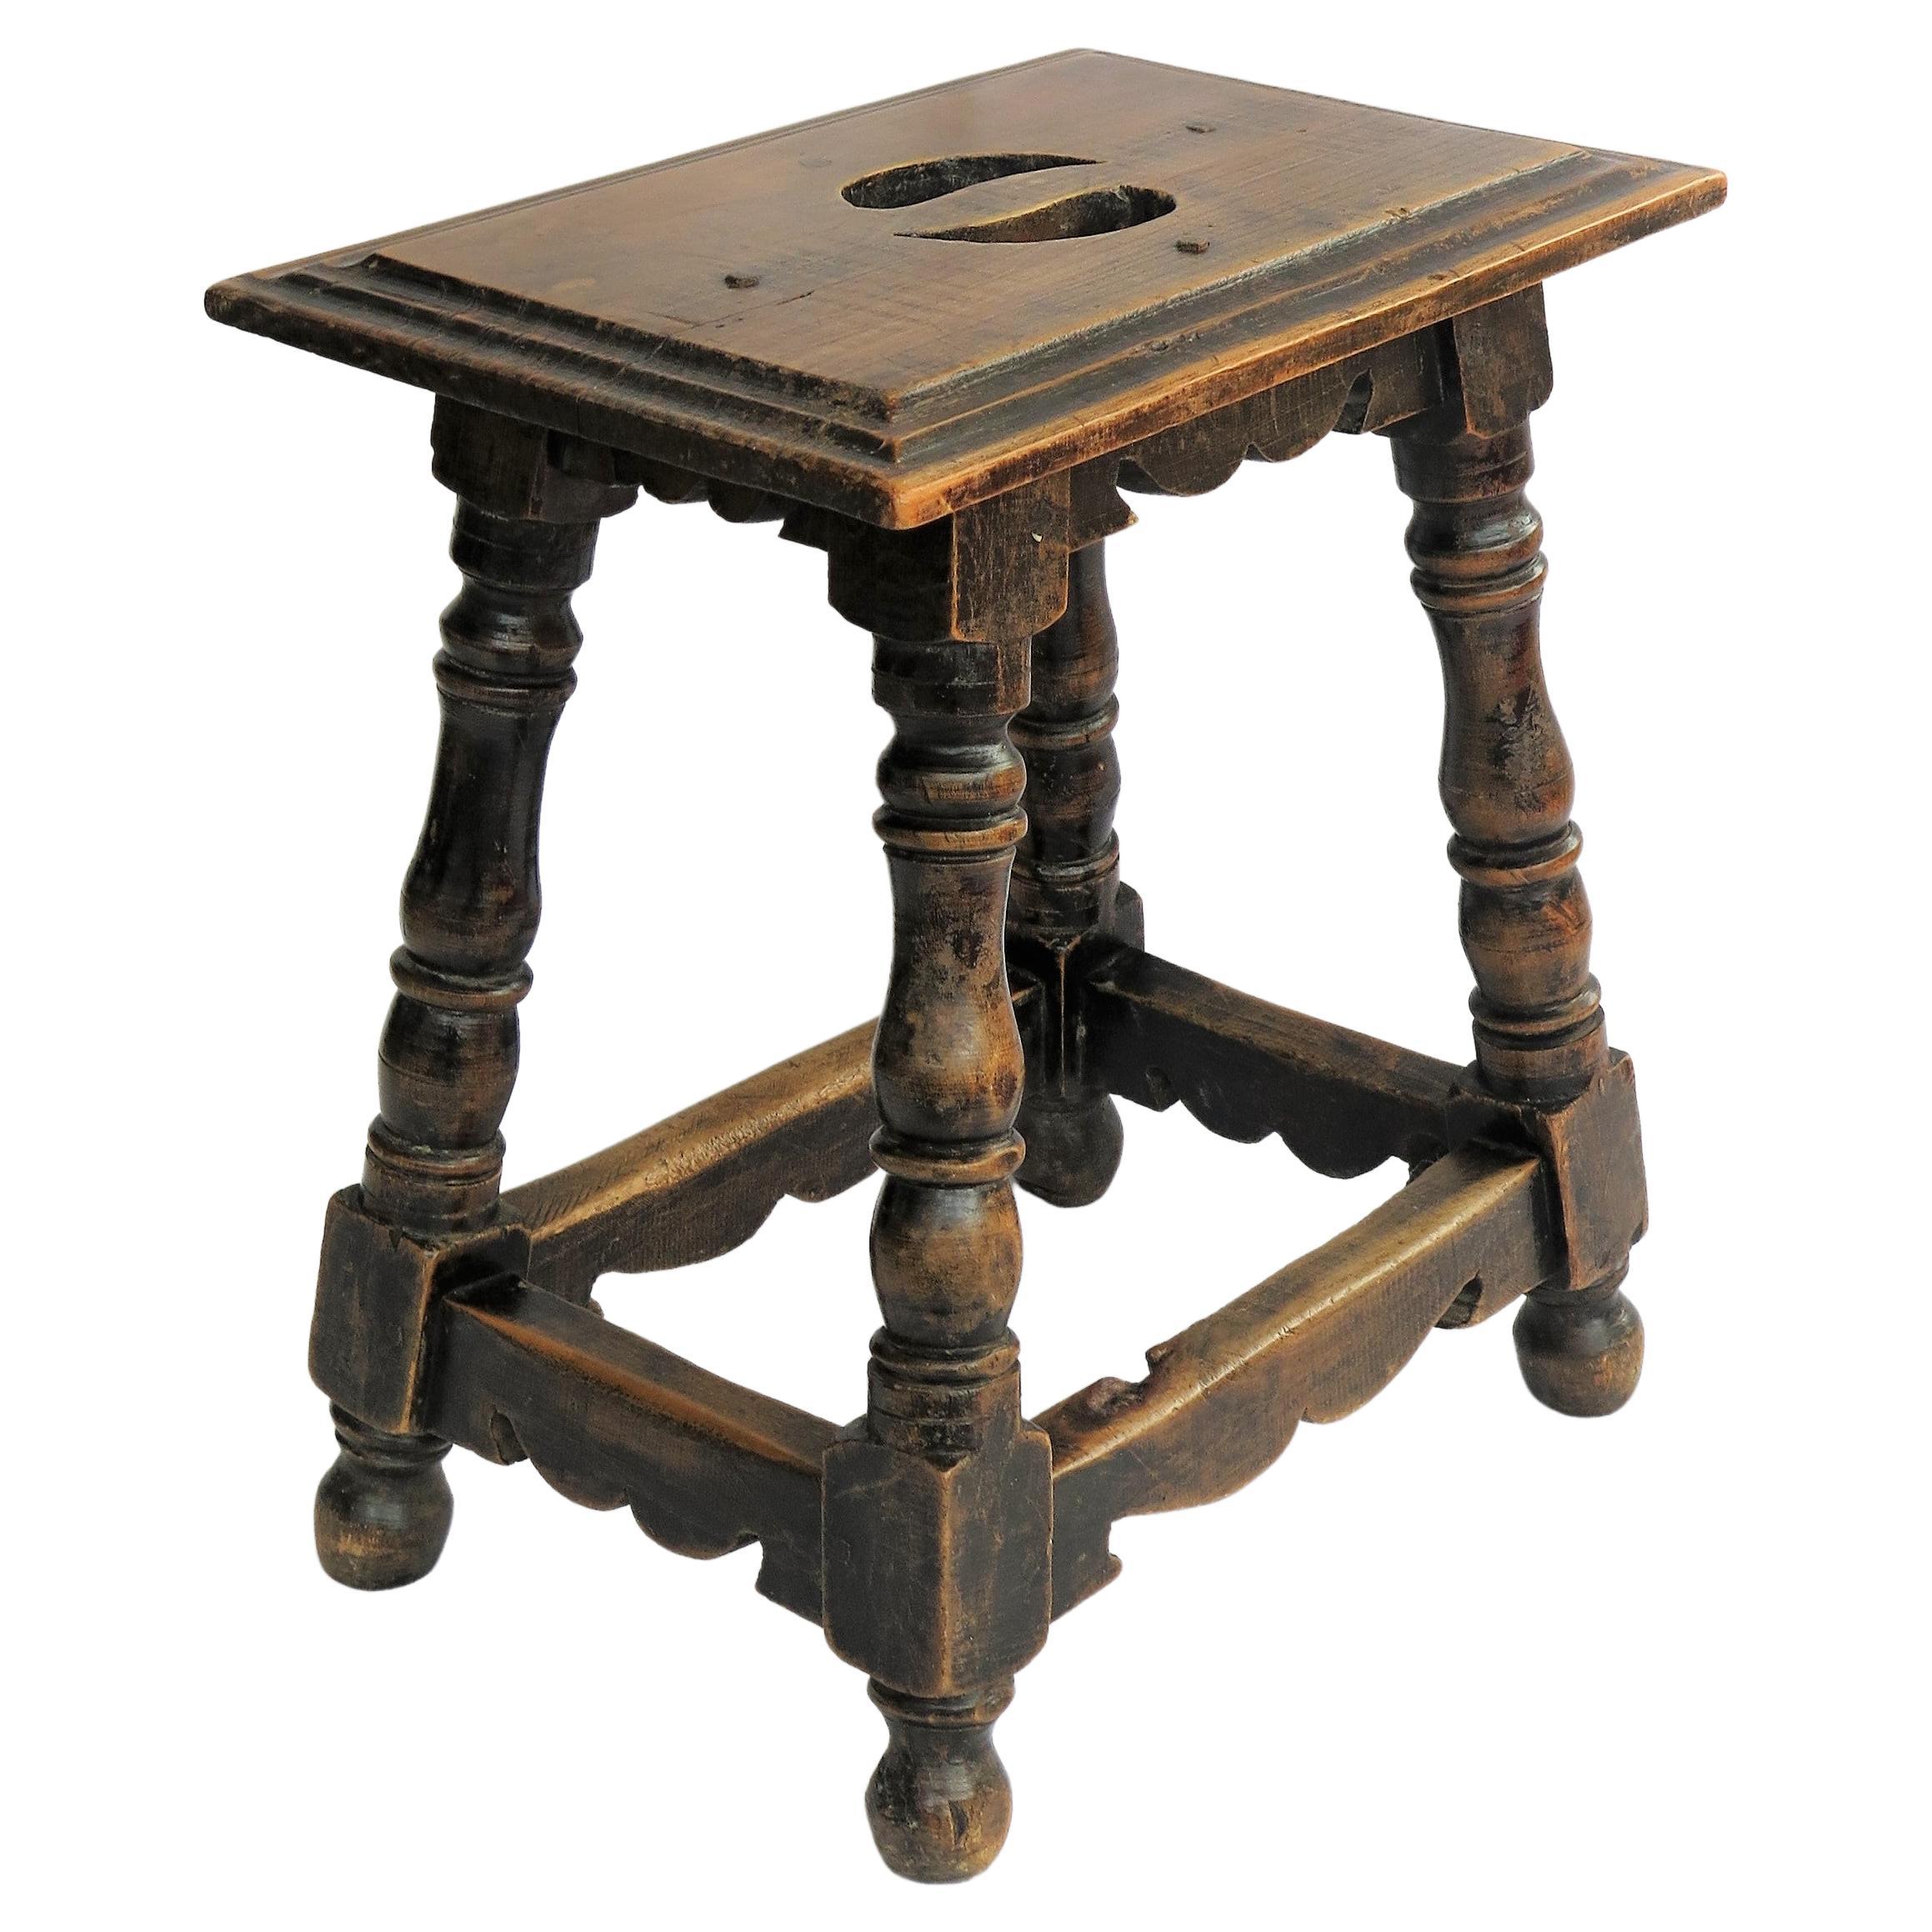 19th Century Walnut Stool Jointed and pegged with turned Legs, French Ca 1830